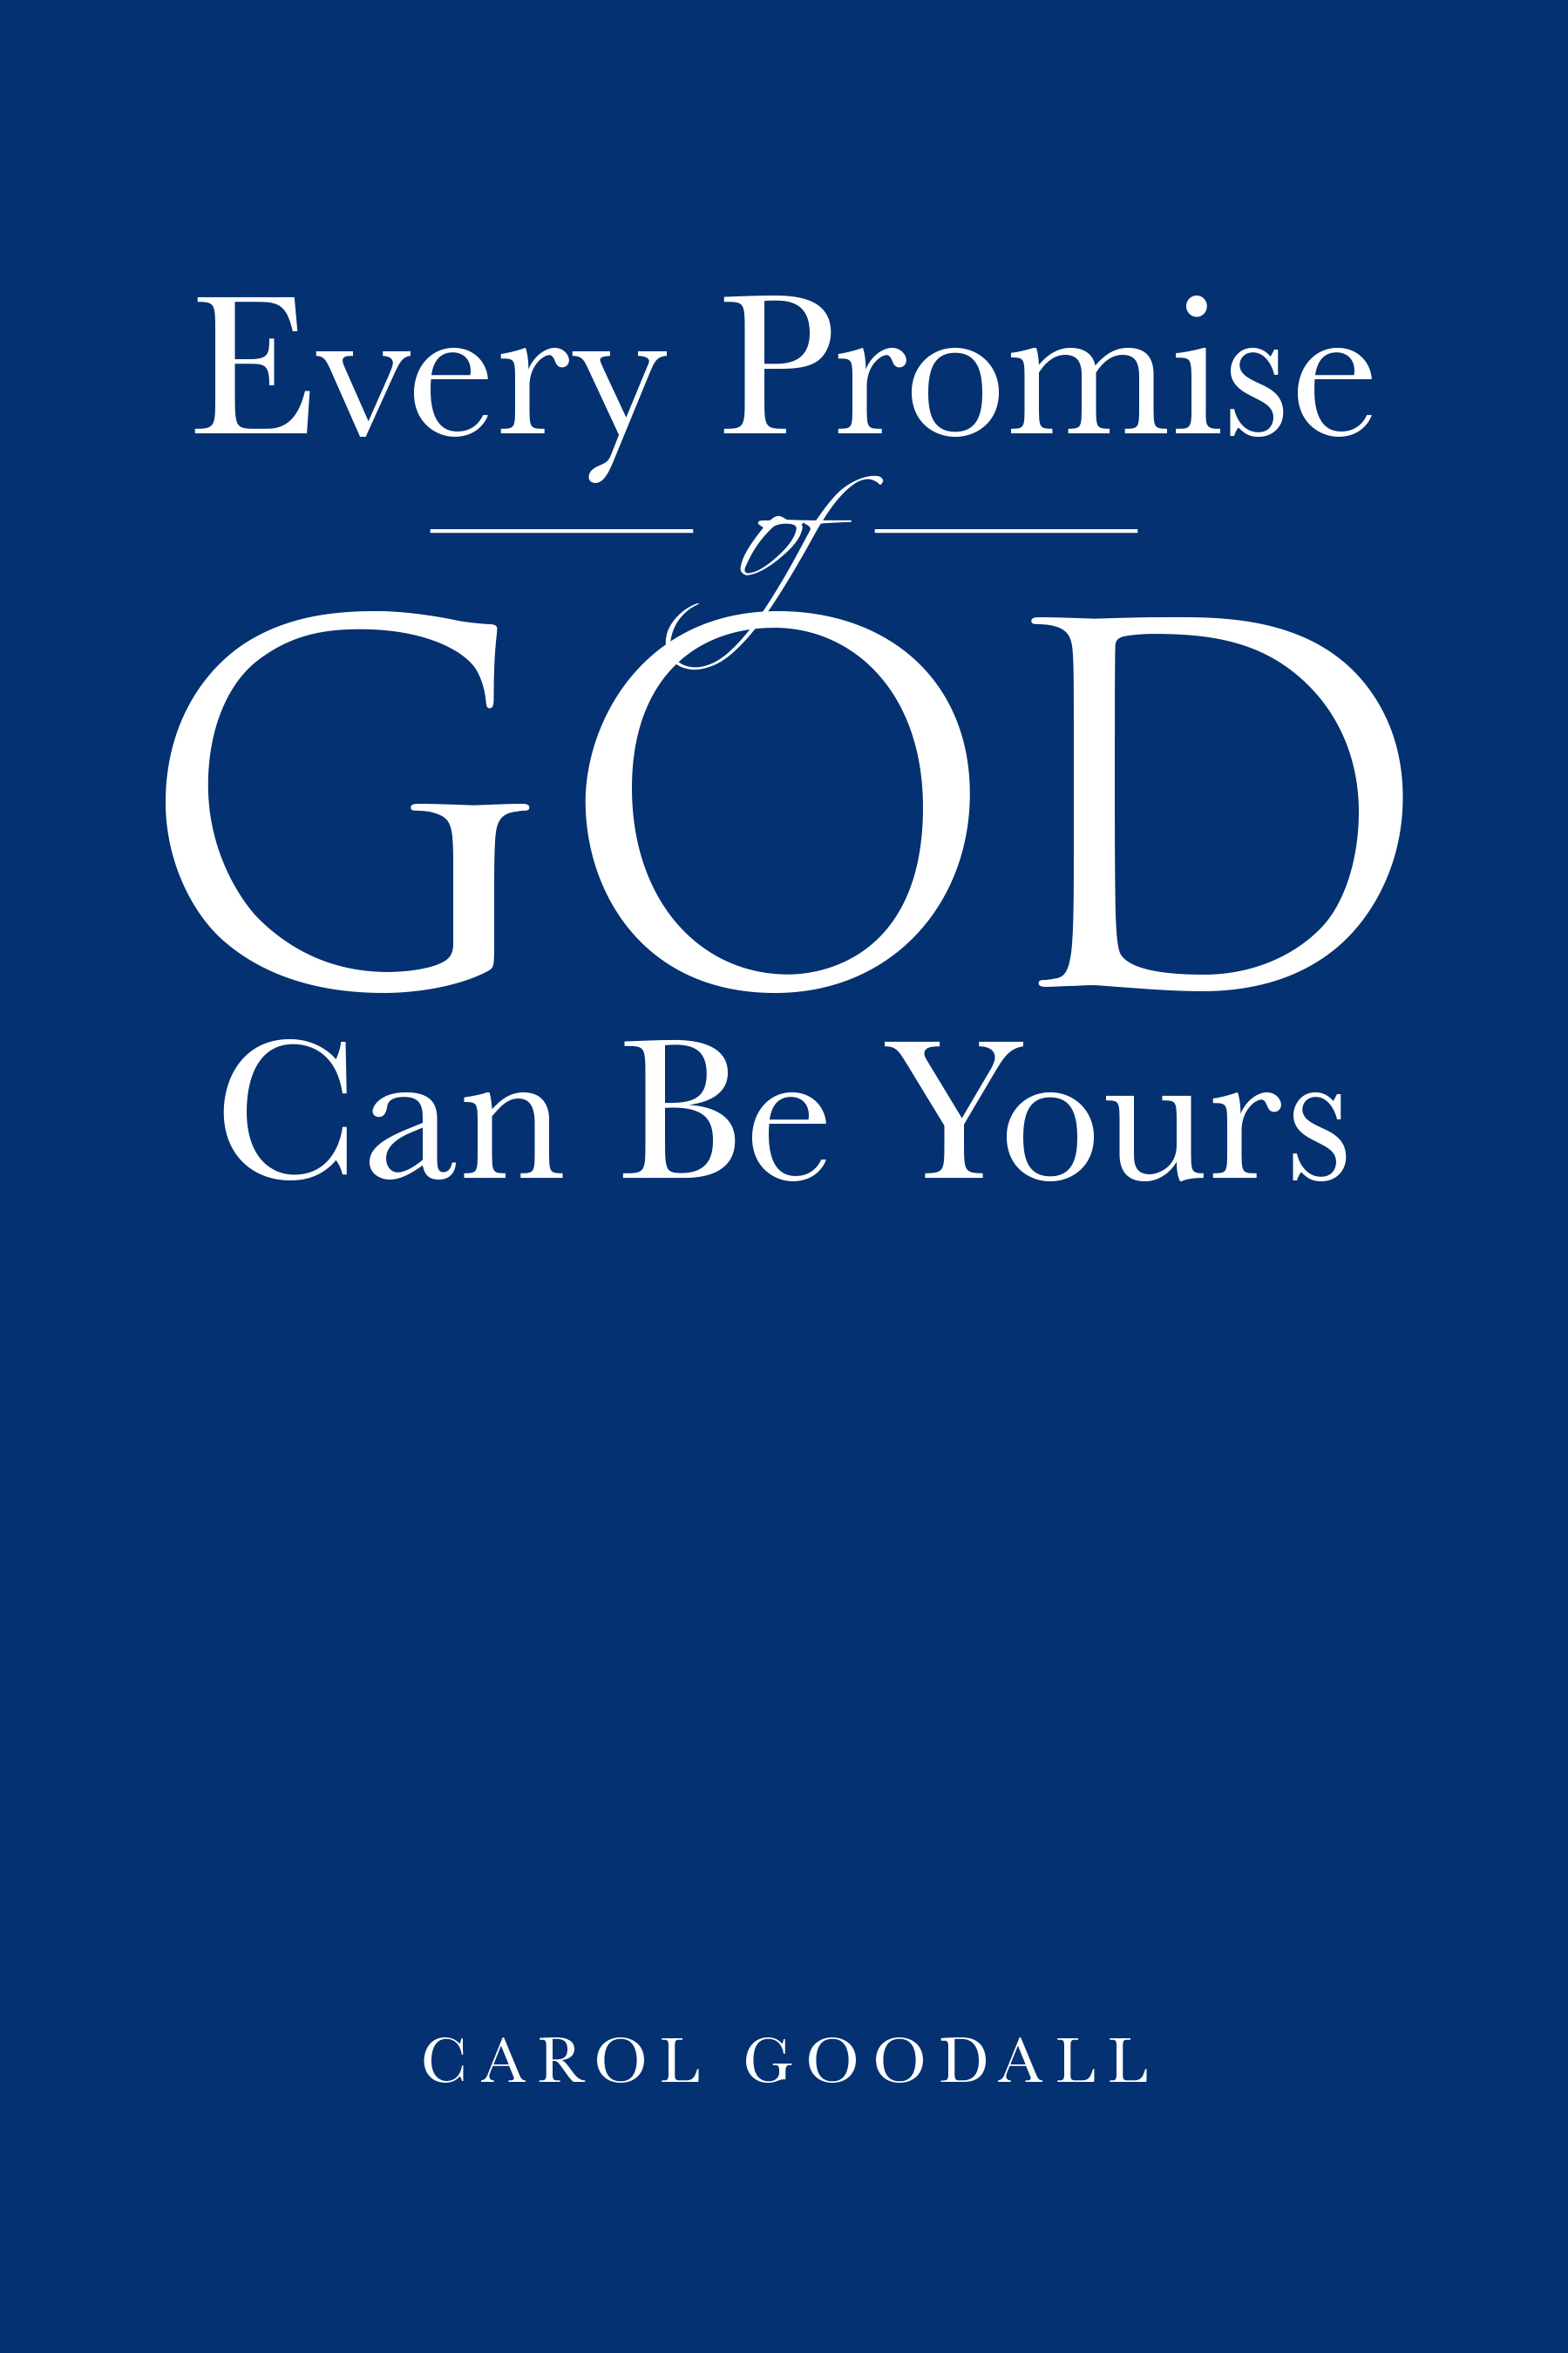 Author Carol Goodall’s New Book, "Every Promise of God Can be Yours," Explores How to Strengthen One’s Faith in Order to Receive God’s Promises Given in the Bible